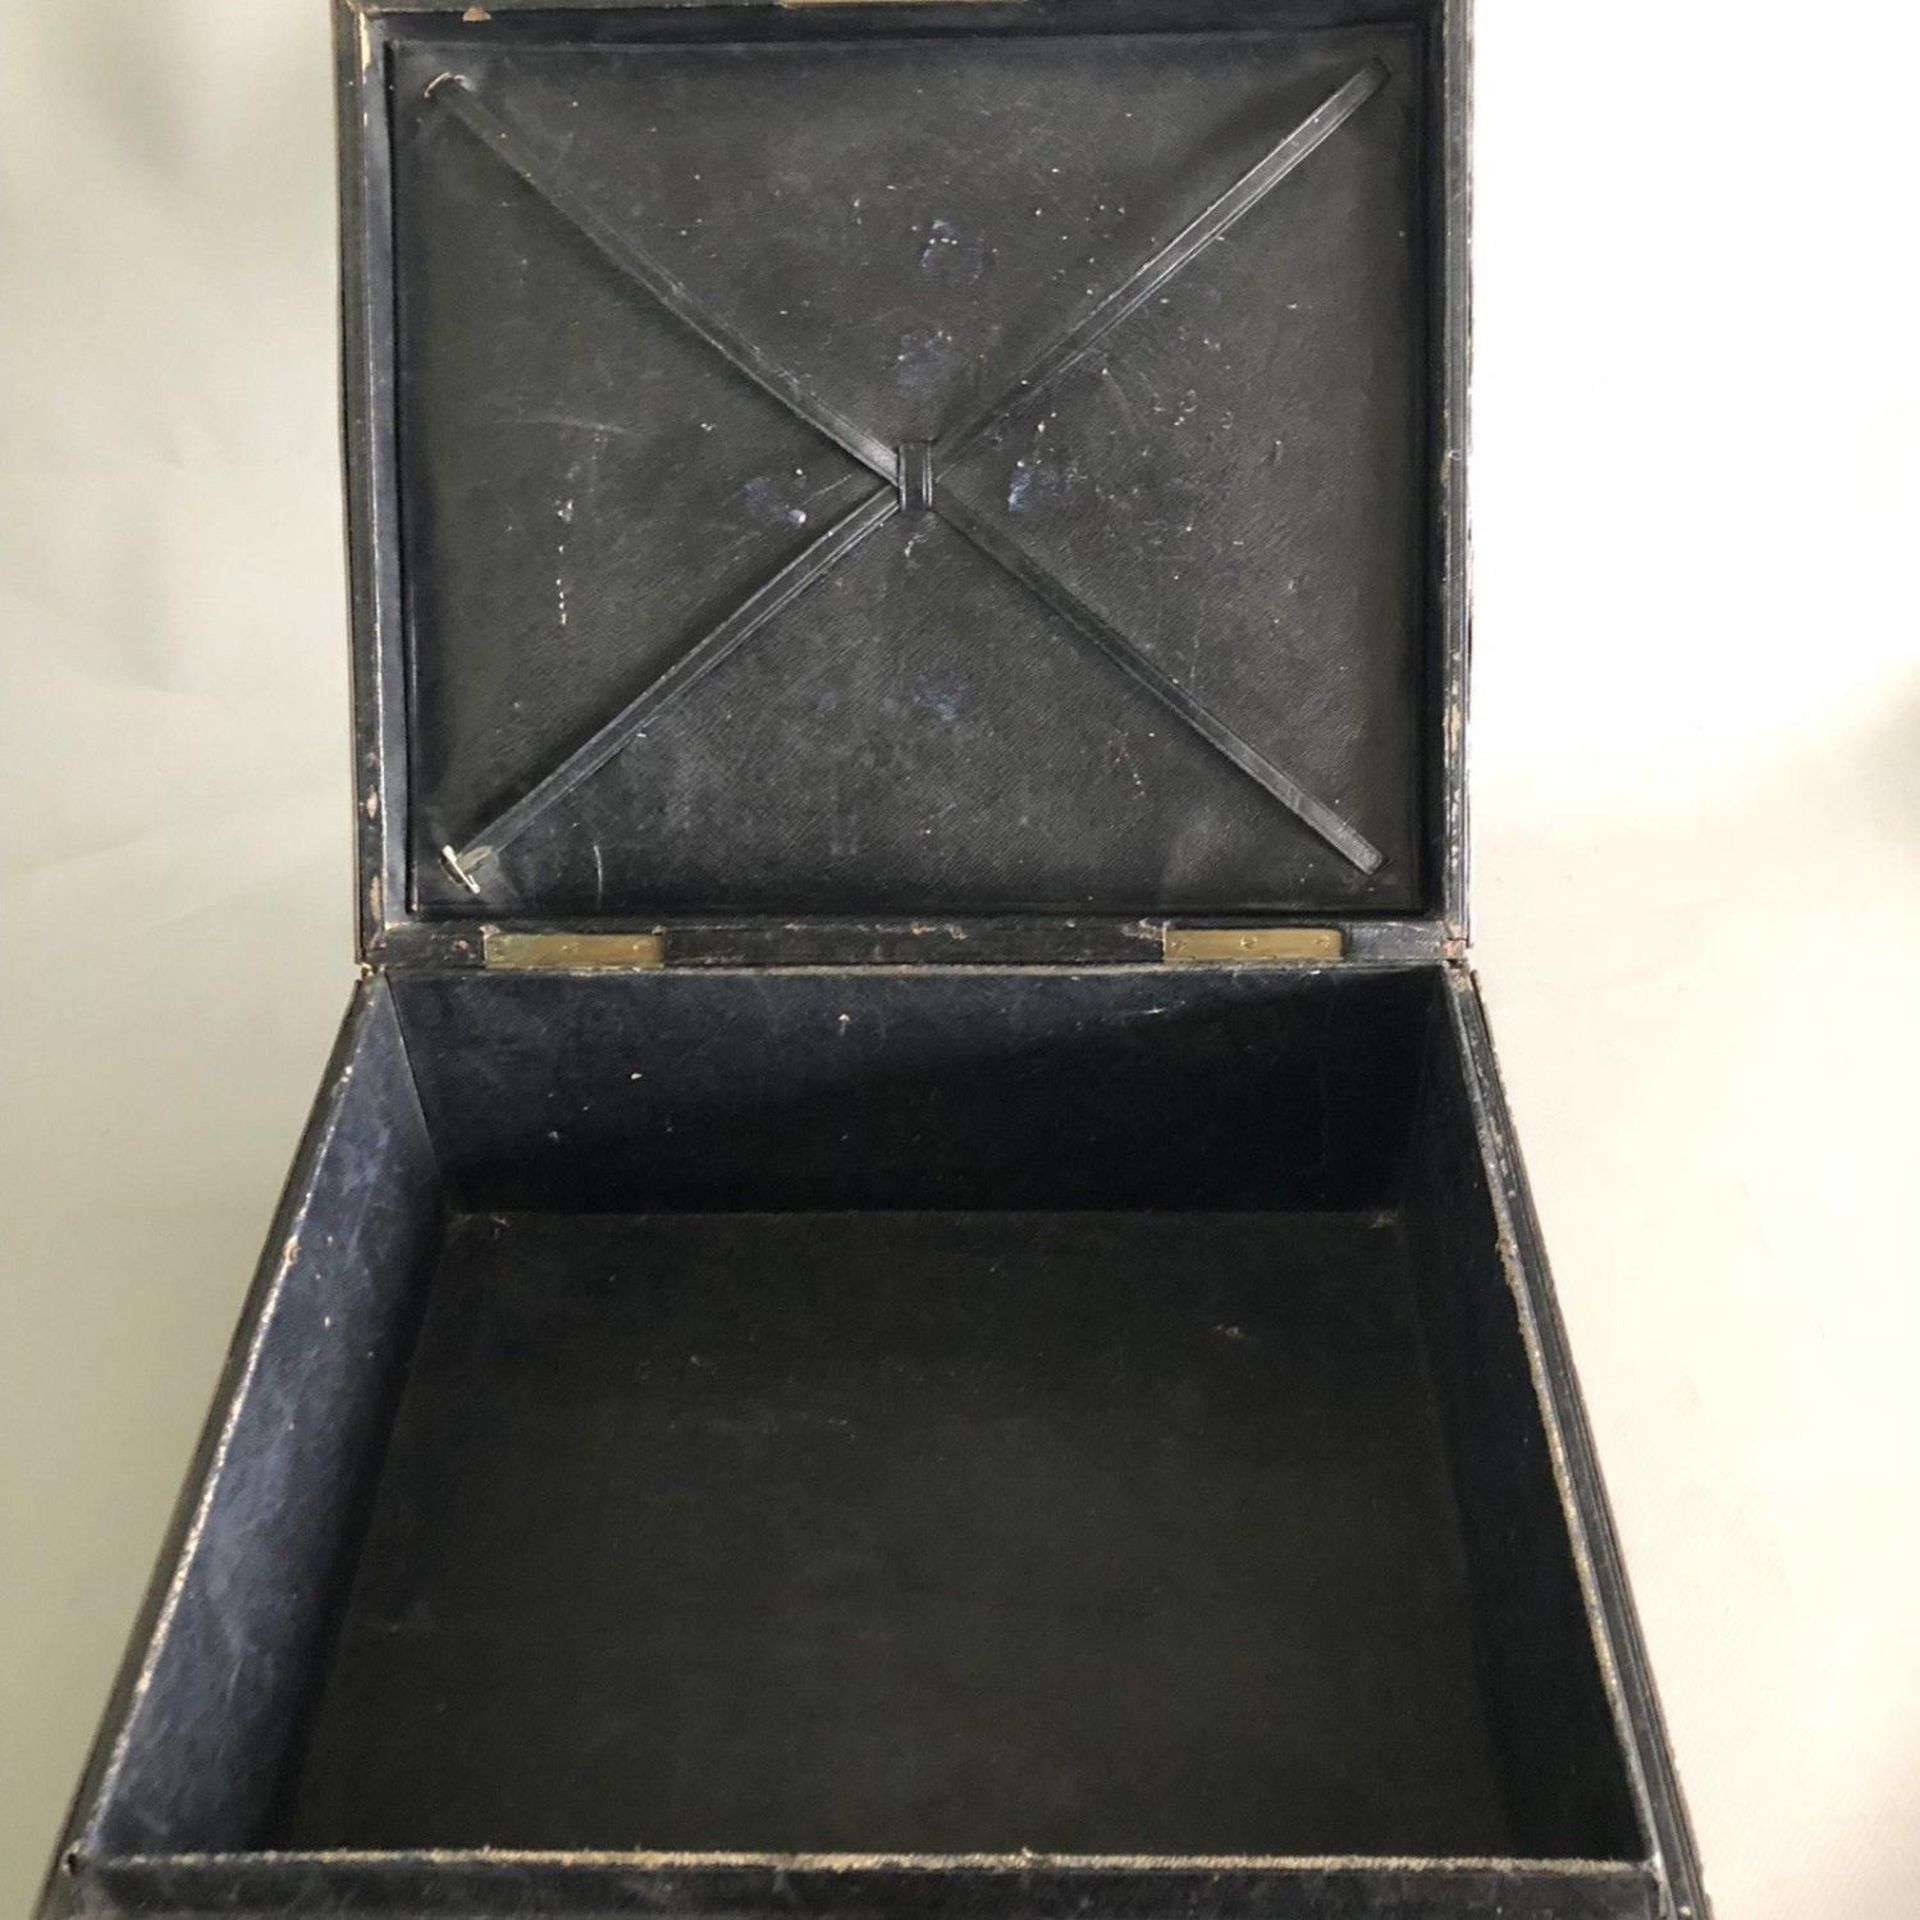 Antique Leather Bound Wooden Box with Original Key - Travelling Vanity Case ? - Image 6 of 6